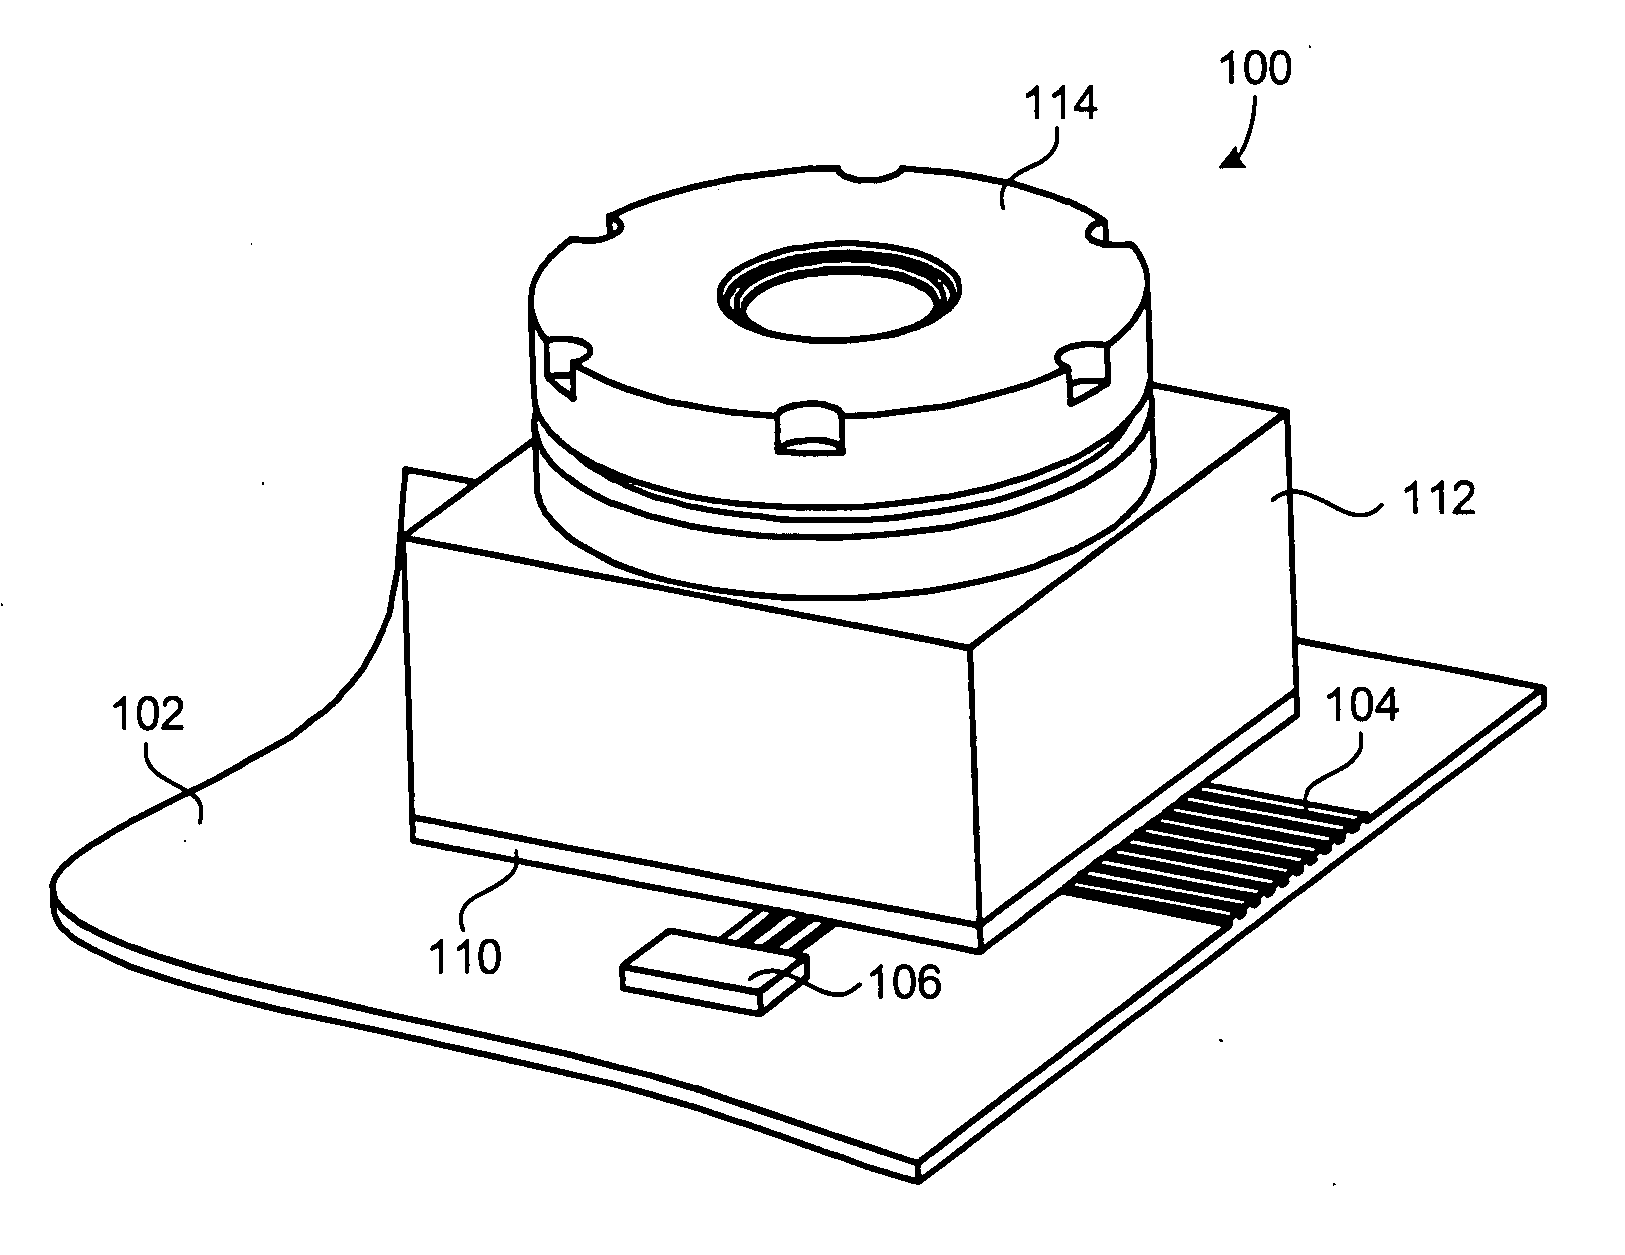 Camera module with contamination reduction feature